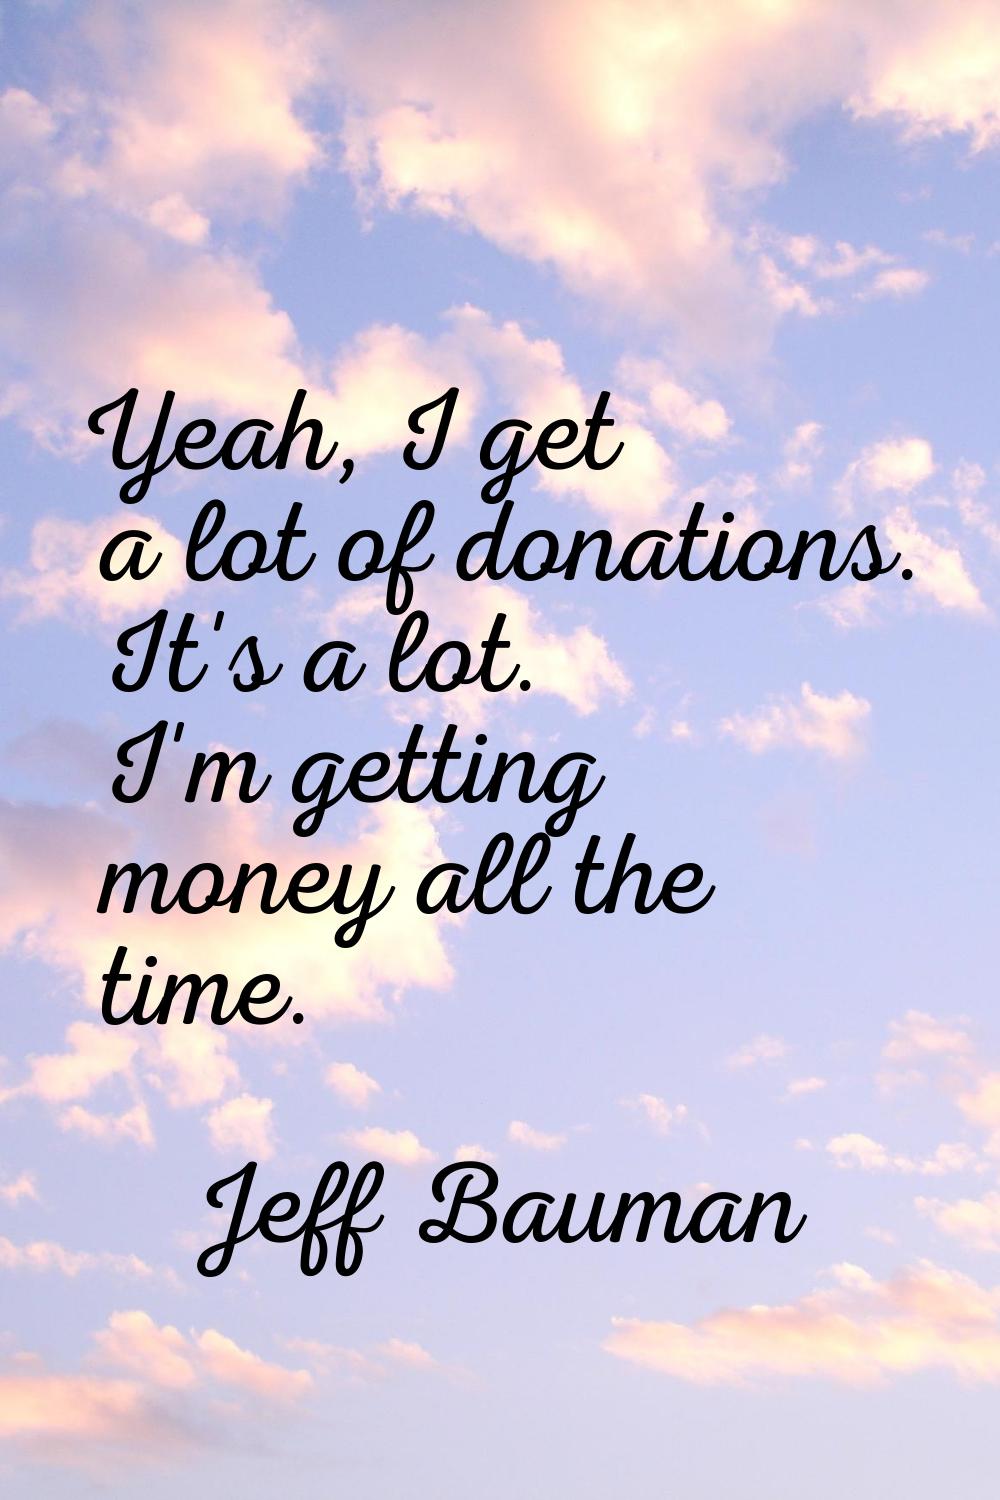 Yeah, I get a lot of donations. It's a lot. I'm getting money all the time.